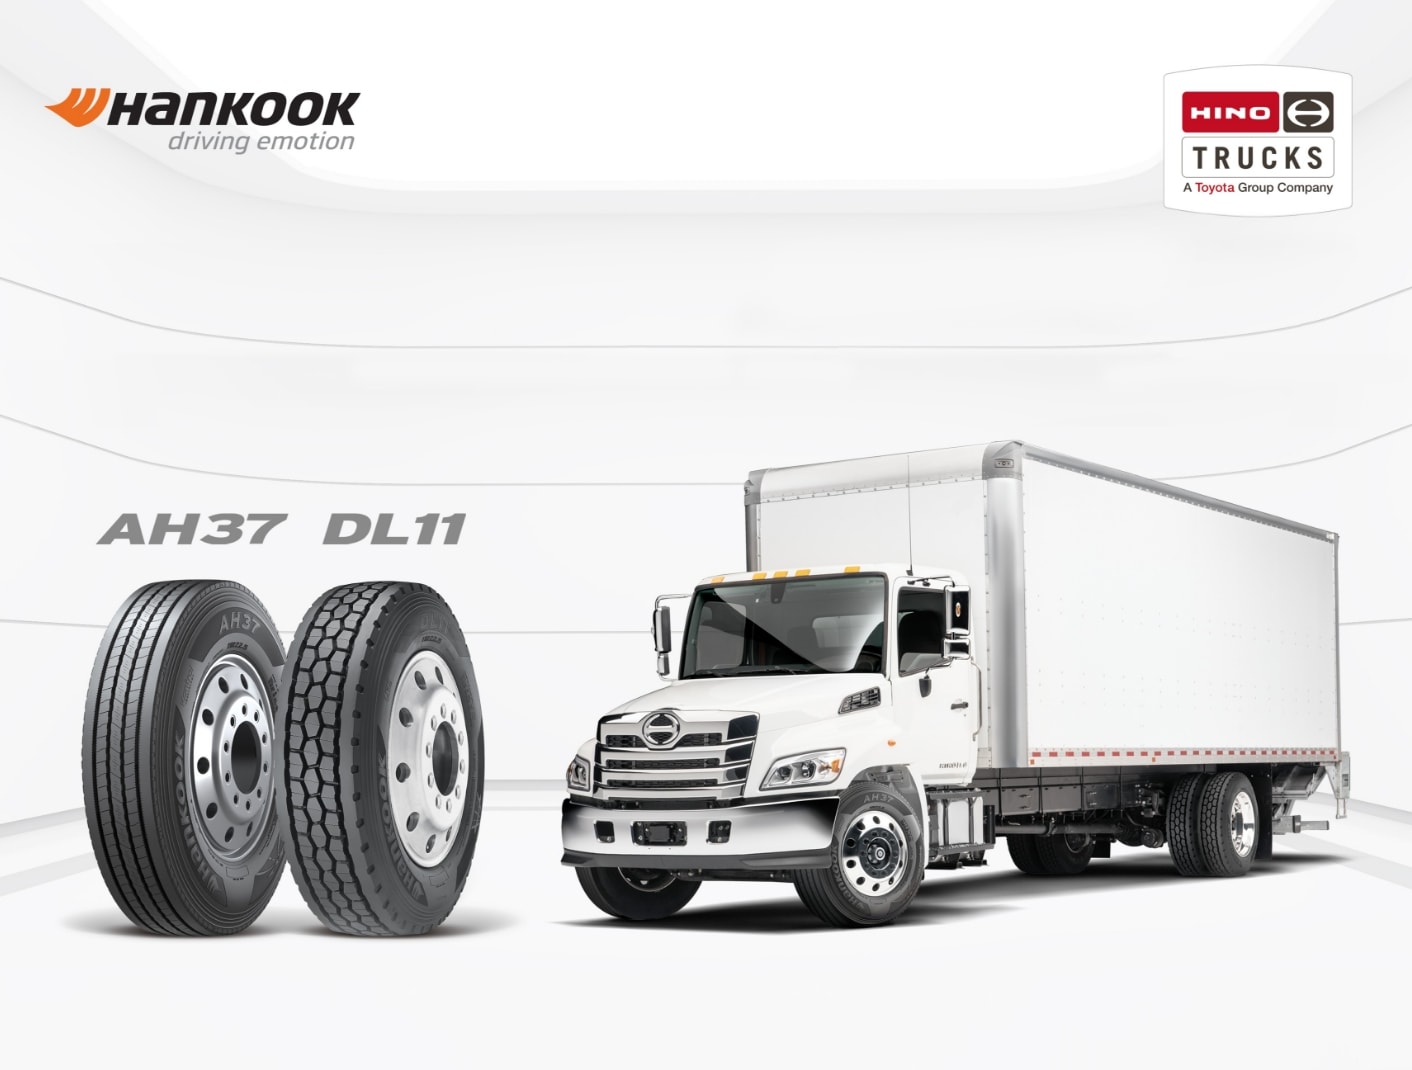 Hino Trucks and Hino Canada select Hankook Tire TBR products to equip U.S. and Canada truck lineup